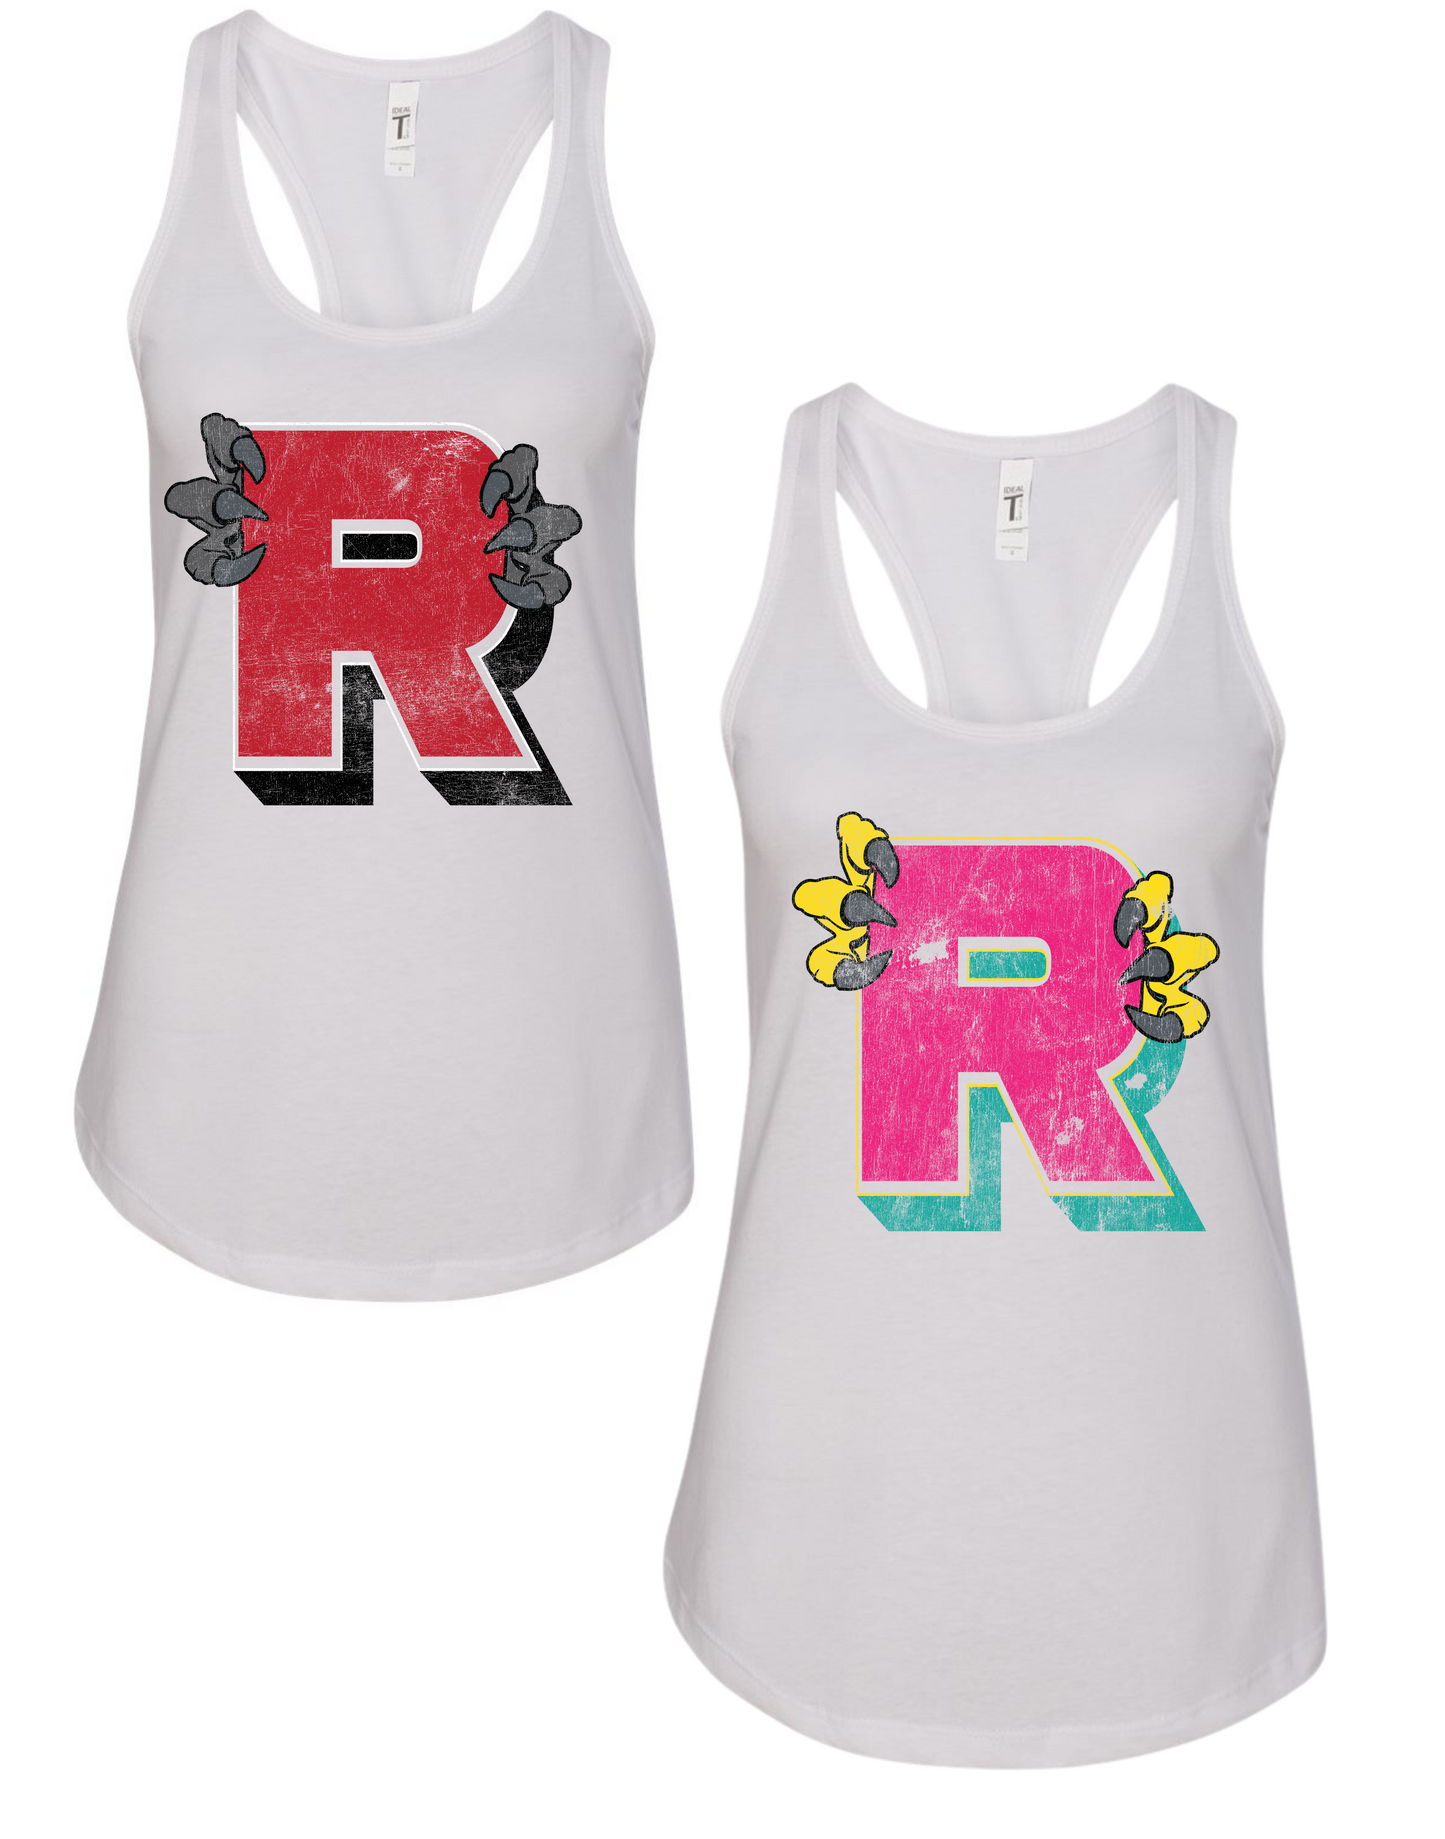 ADULT OM Raptors Get your Claws out T'shirts Red or Pink "R" TANK TOPS